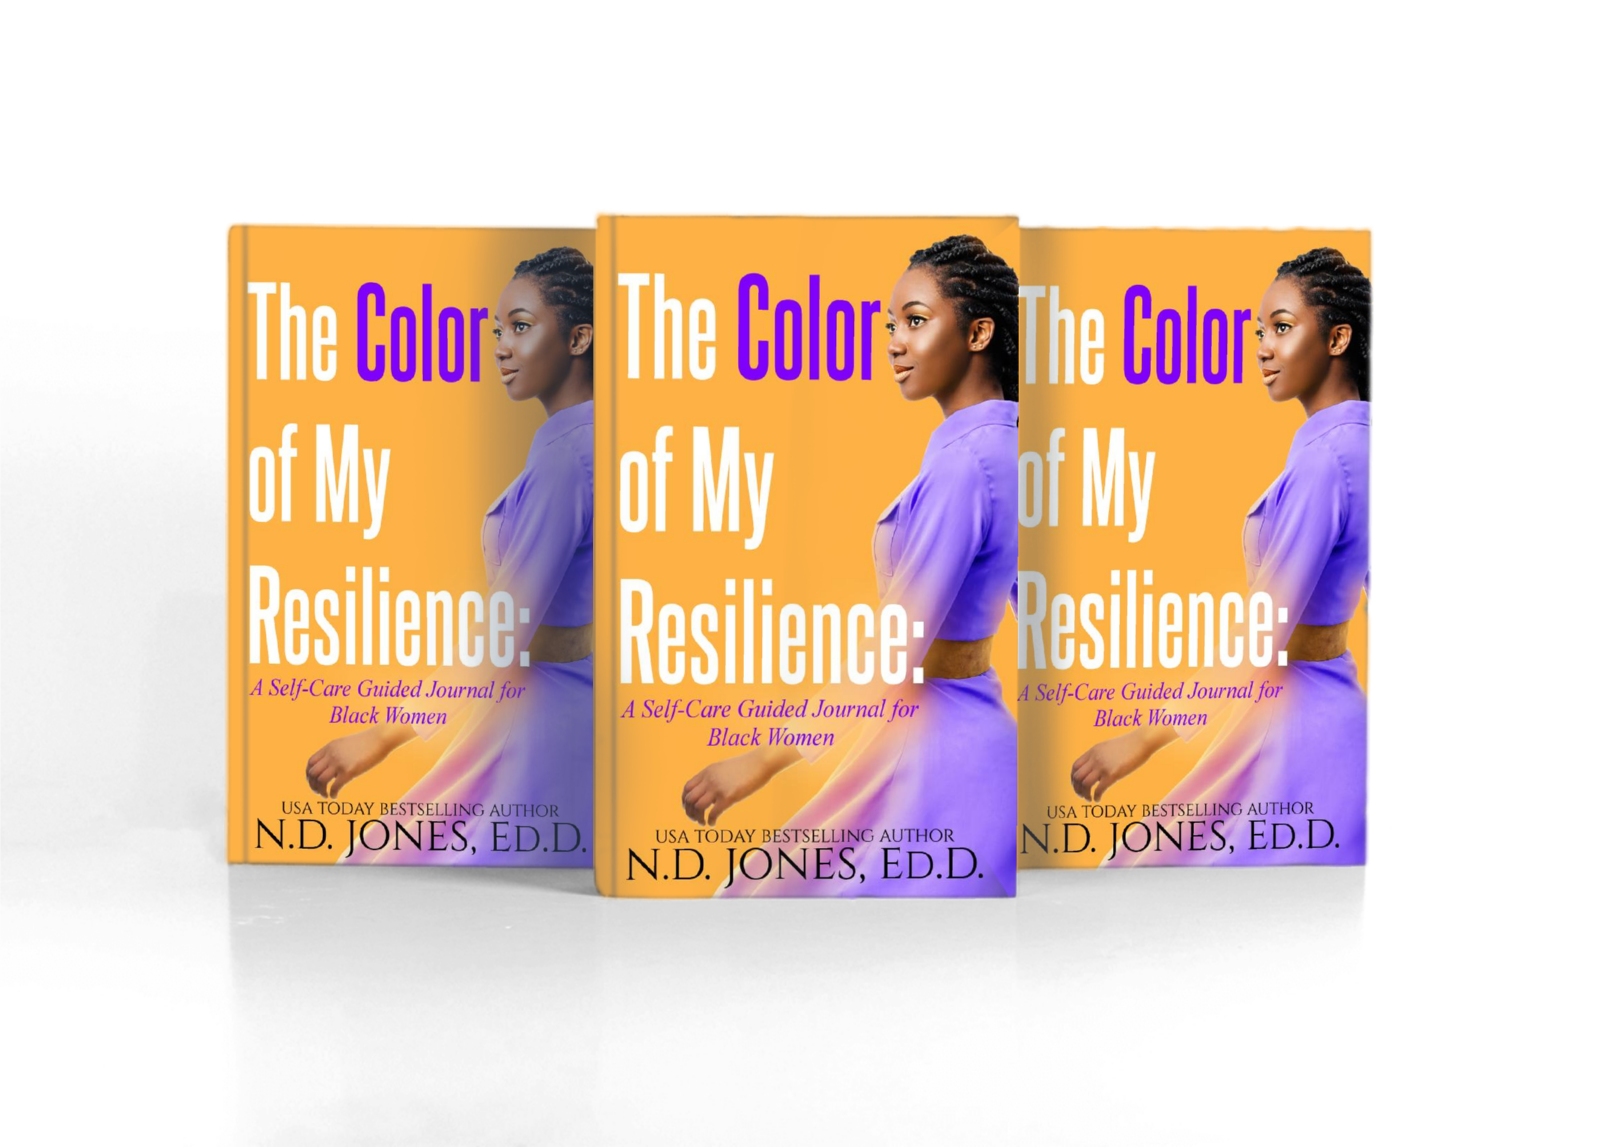 The Color of My Resilience a Guided Self-Care Journal for Black Women by ND Jones